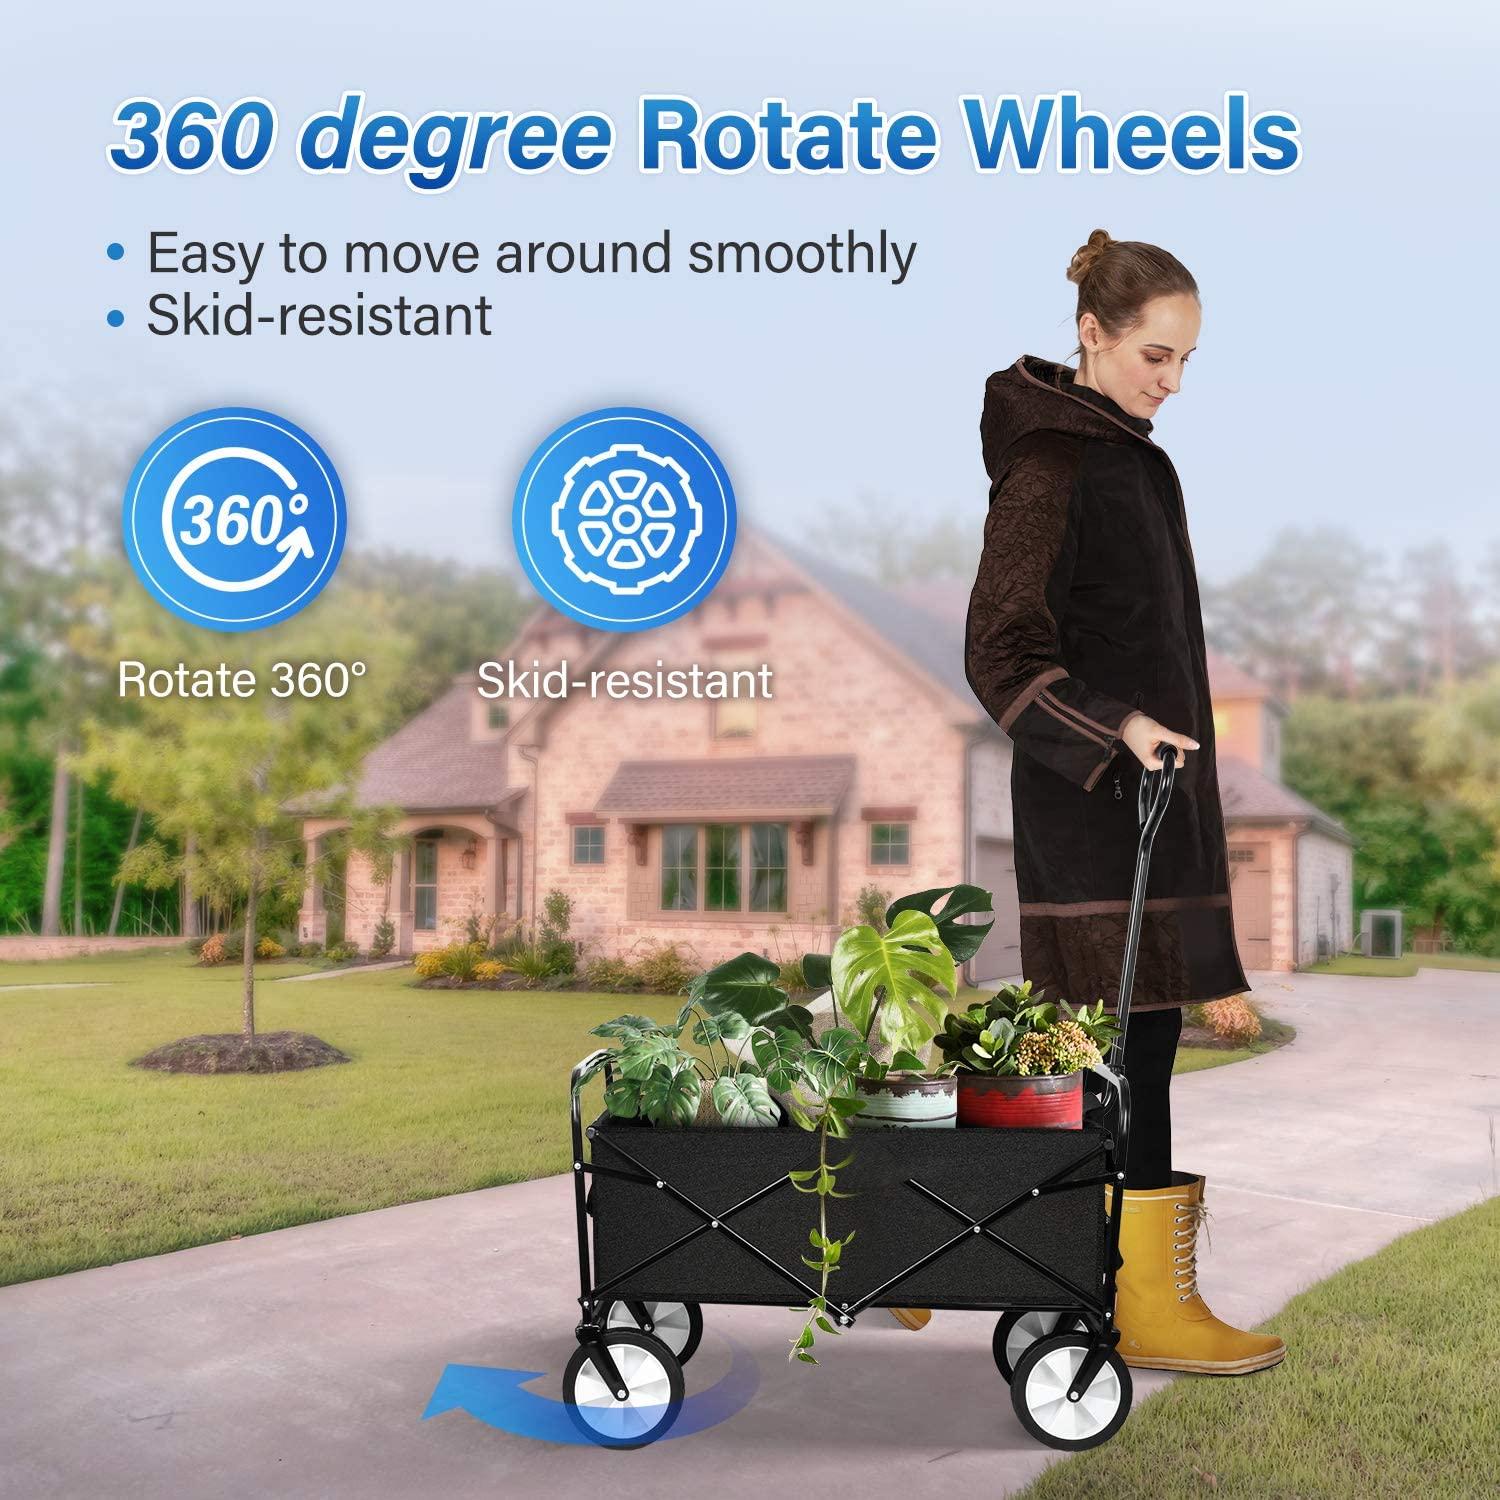 Recycle Bin Cart Metal-Reinforced Recycling Bins Cart with 4 Wheels for Home,Kitchen,Garden Garbage,360 Degree Swivel Wheels with 220lb Weight